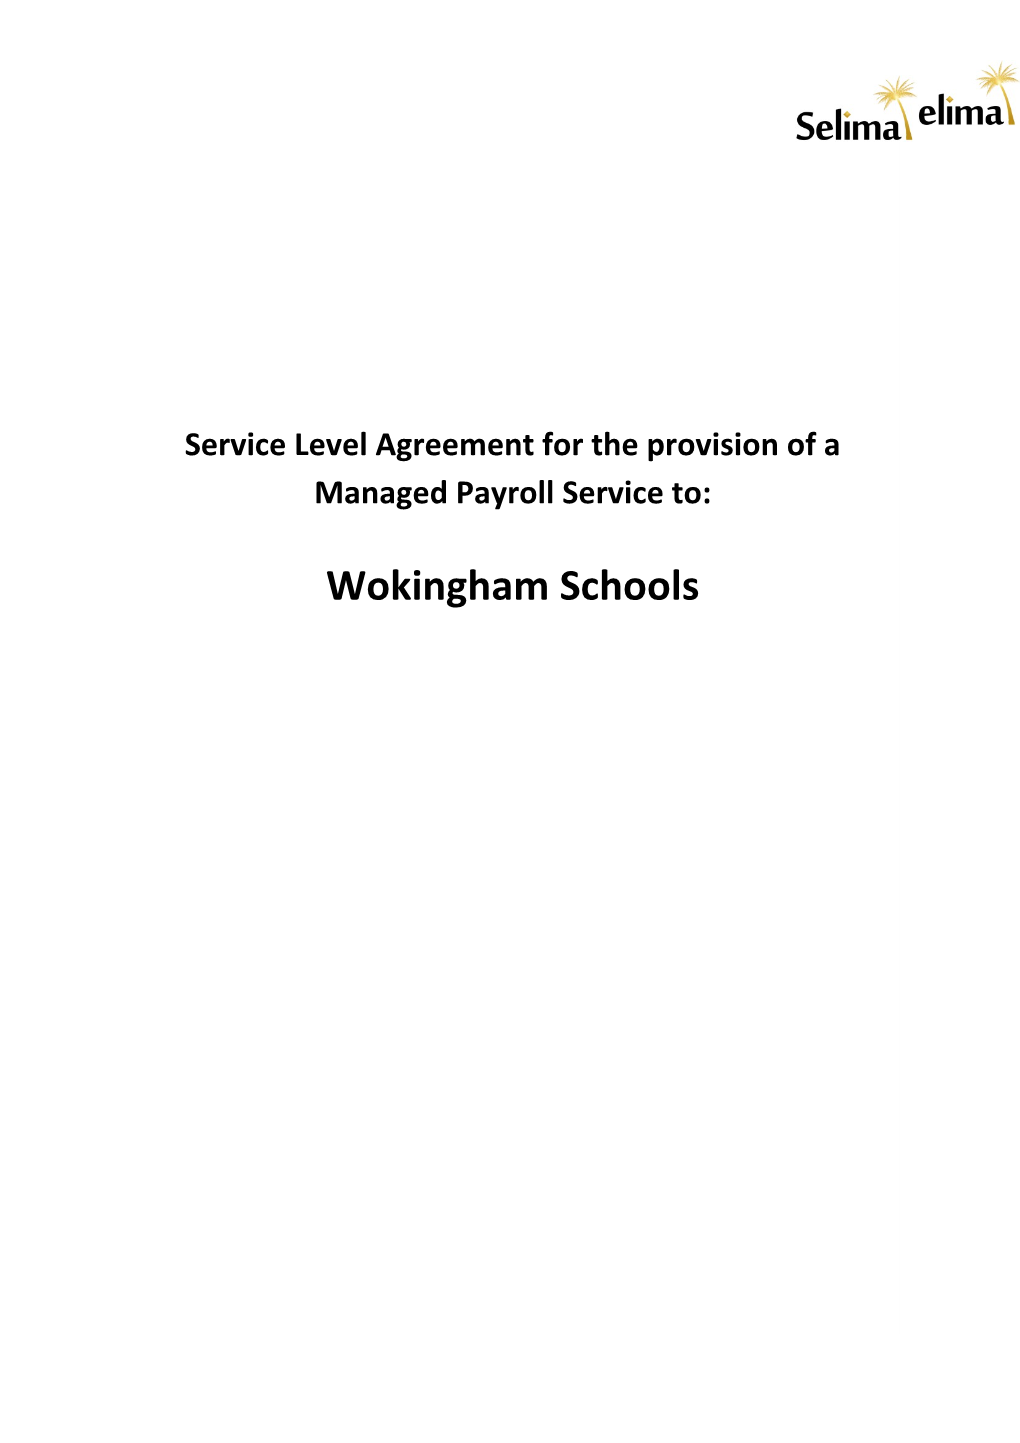 Service Level Agreement for the Provision of a Managed Payroll Service To